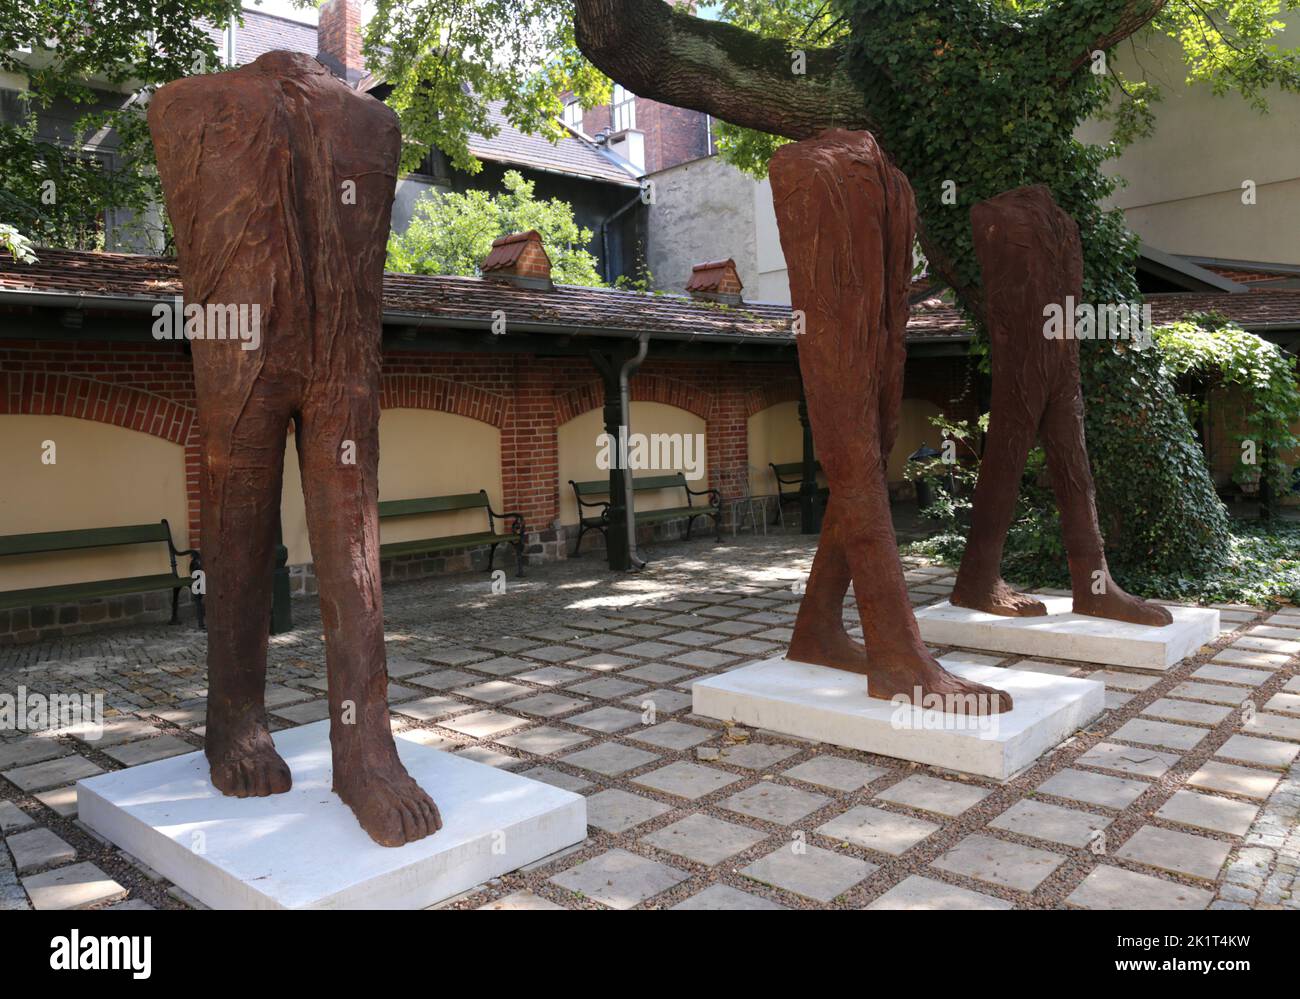 Cracow. Krakow. Poland. 'Walking Figures' made of cast iron sculptures by Magdalena Abakanowicz seen in the Czapski Palace (part of National Museum) Stock Photo